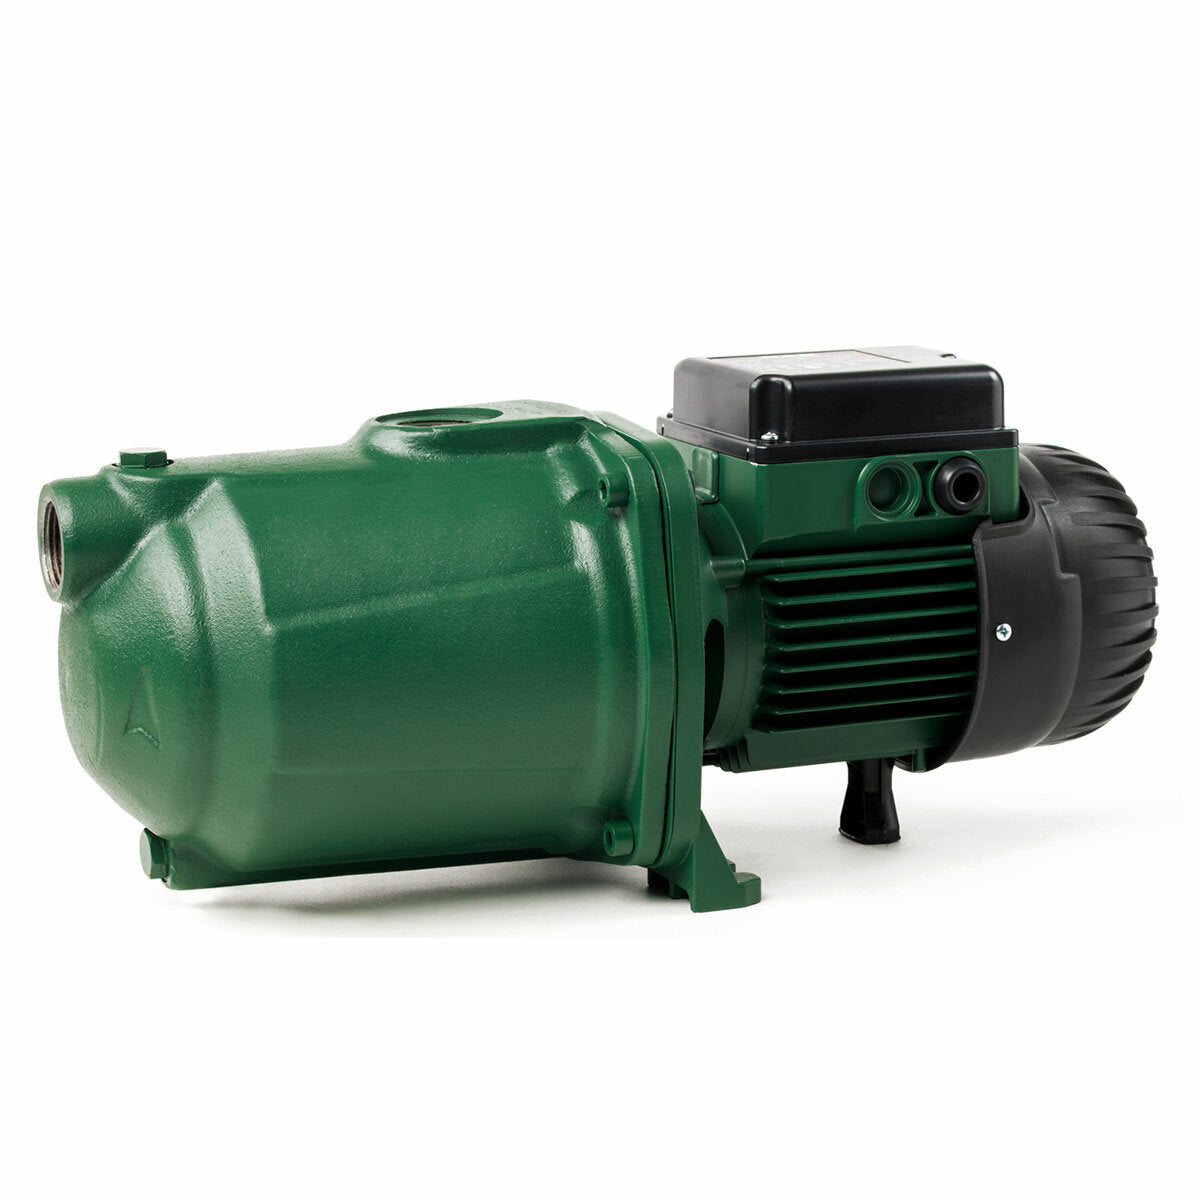 DAB EURO 40/80M multistage centrifugal surface pump single-phase 1,36 HP/1 kW